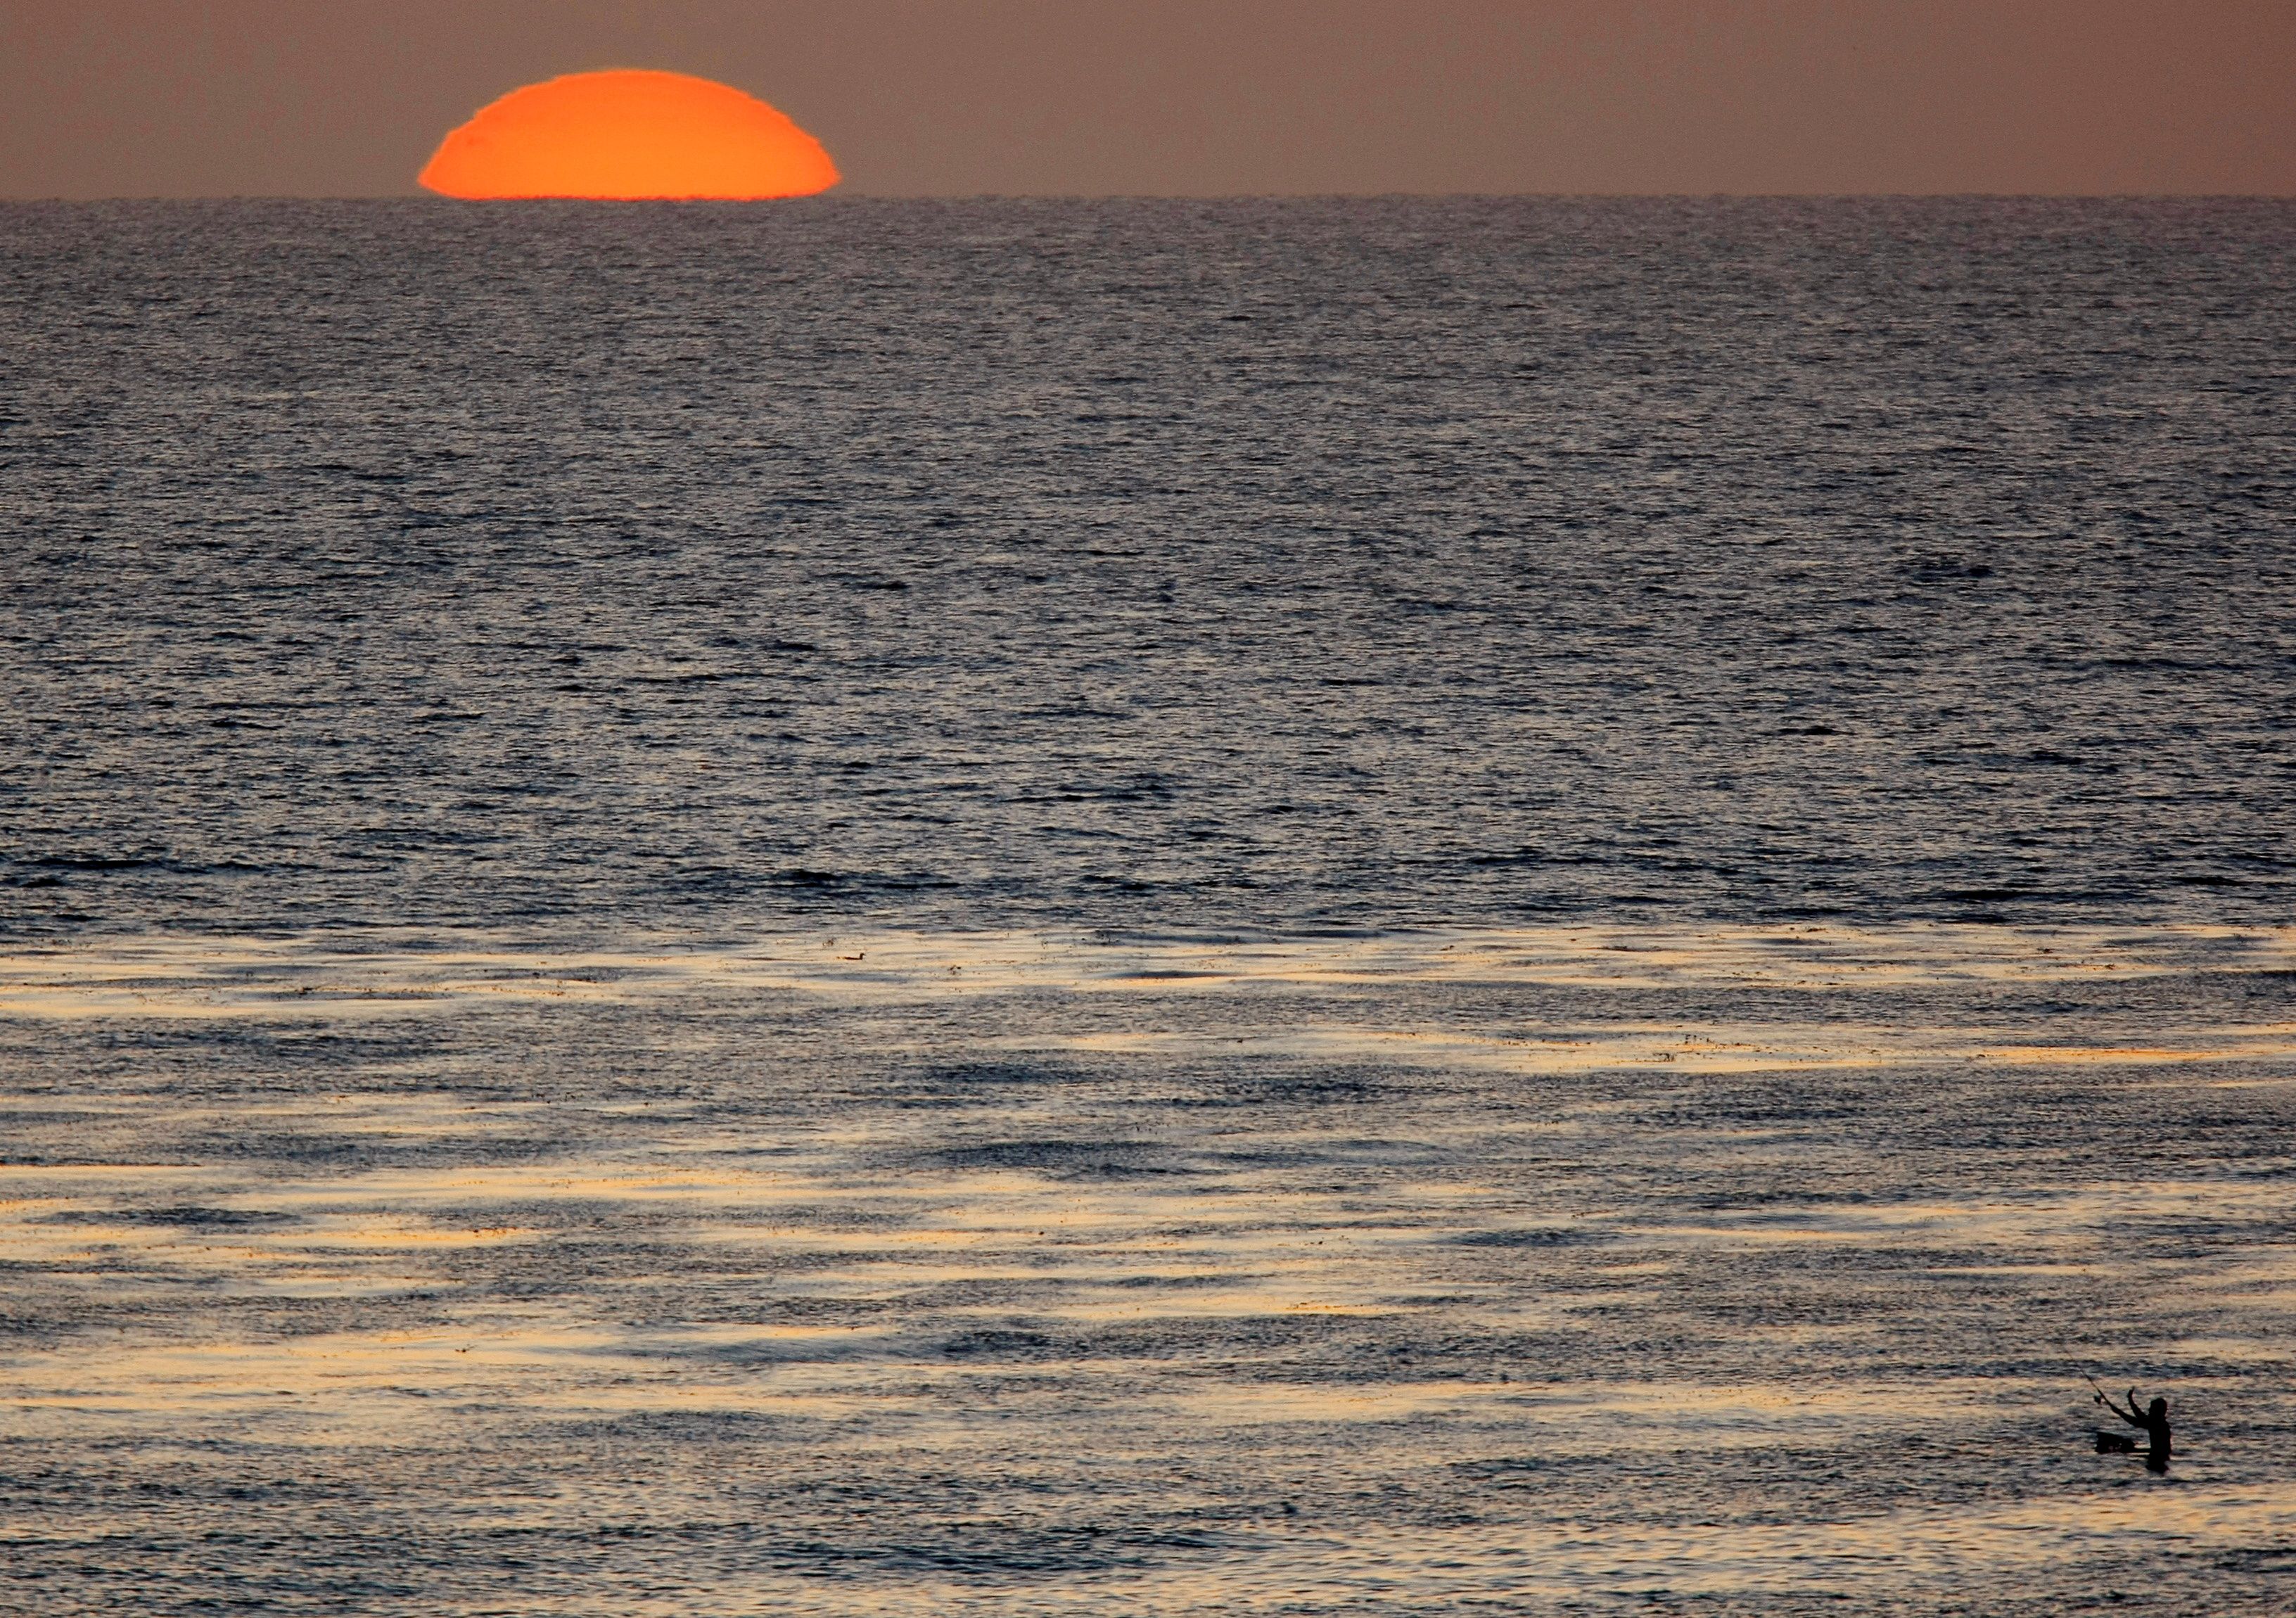 The sun sets as a fisherman casts his line in the Pacific Ocean while sitting on a surfboard off the coast of Cardiff